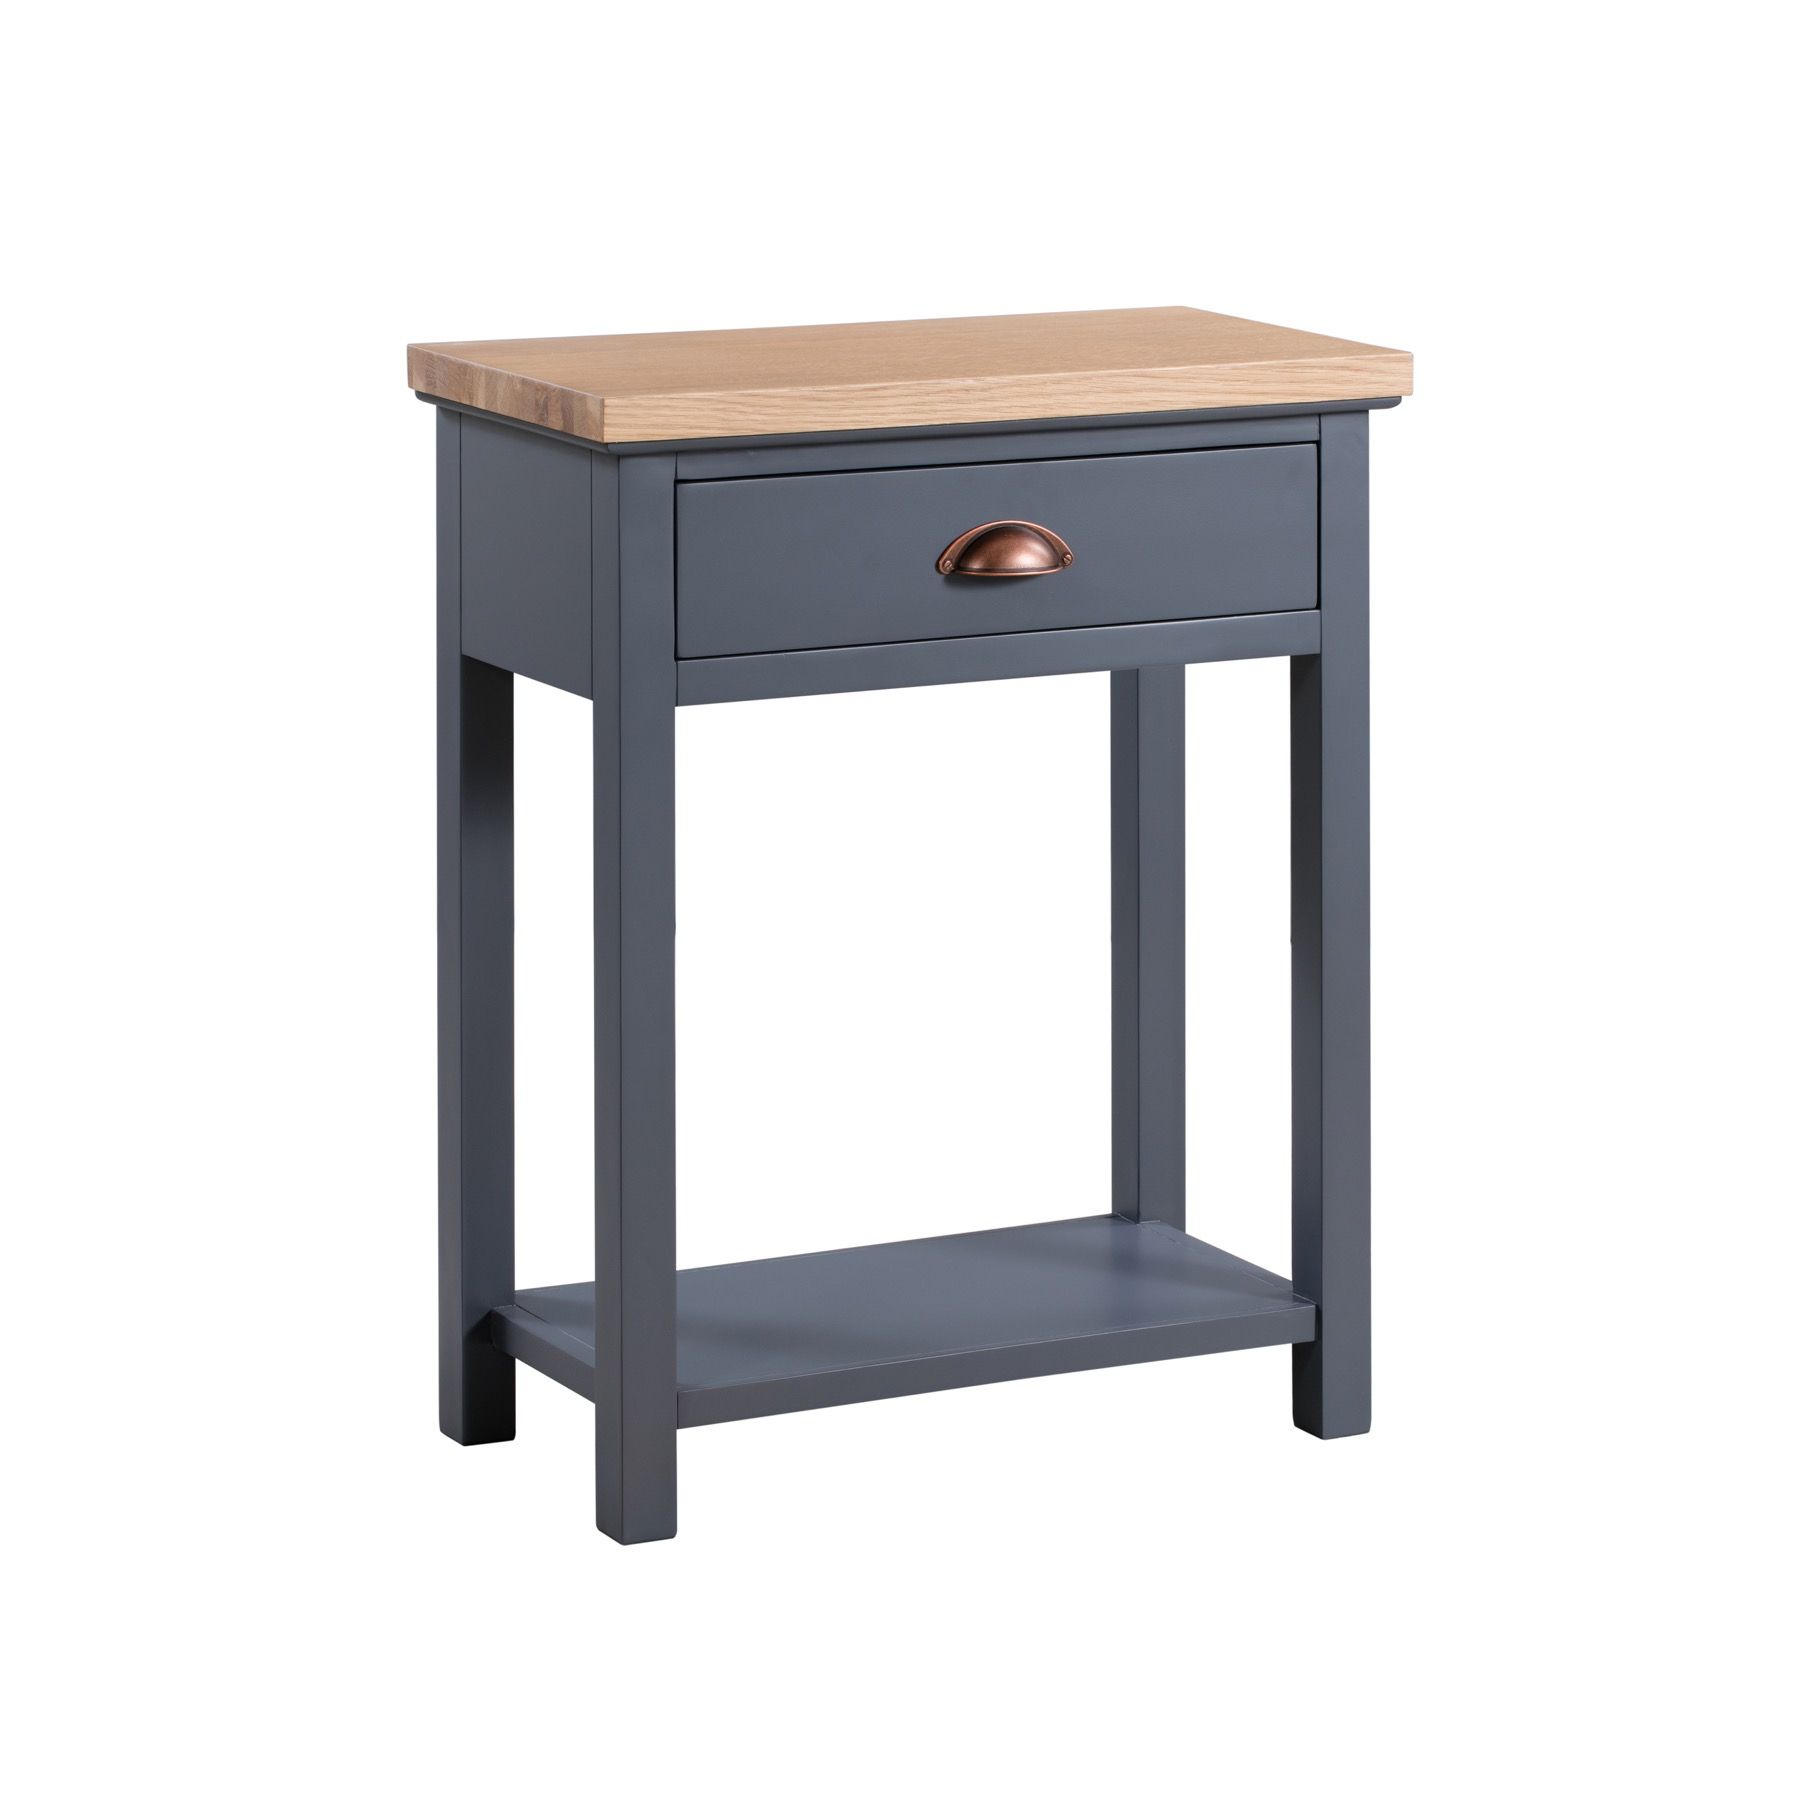 Small Grey Console Table – Grayson Range – Melody Maison® For Smoke Gray Wood Console Tables (View 11 of 20)